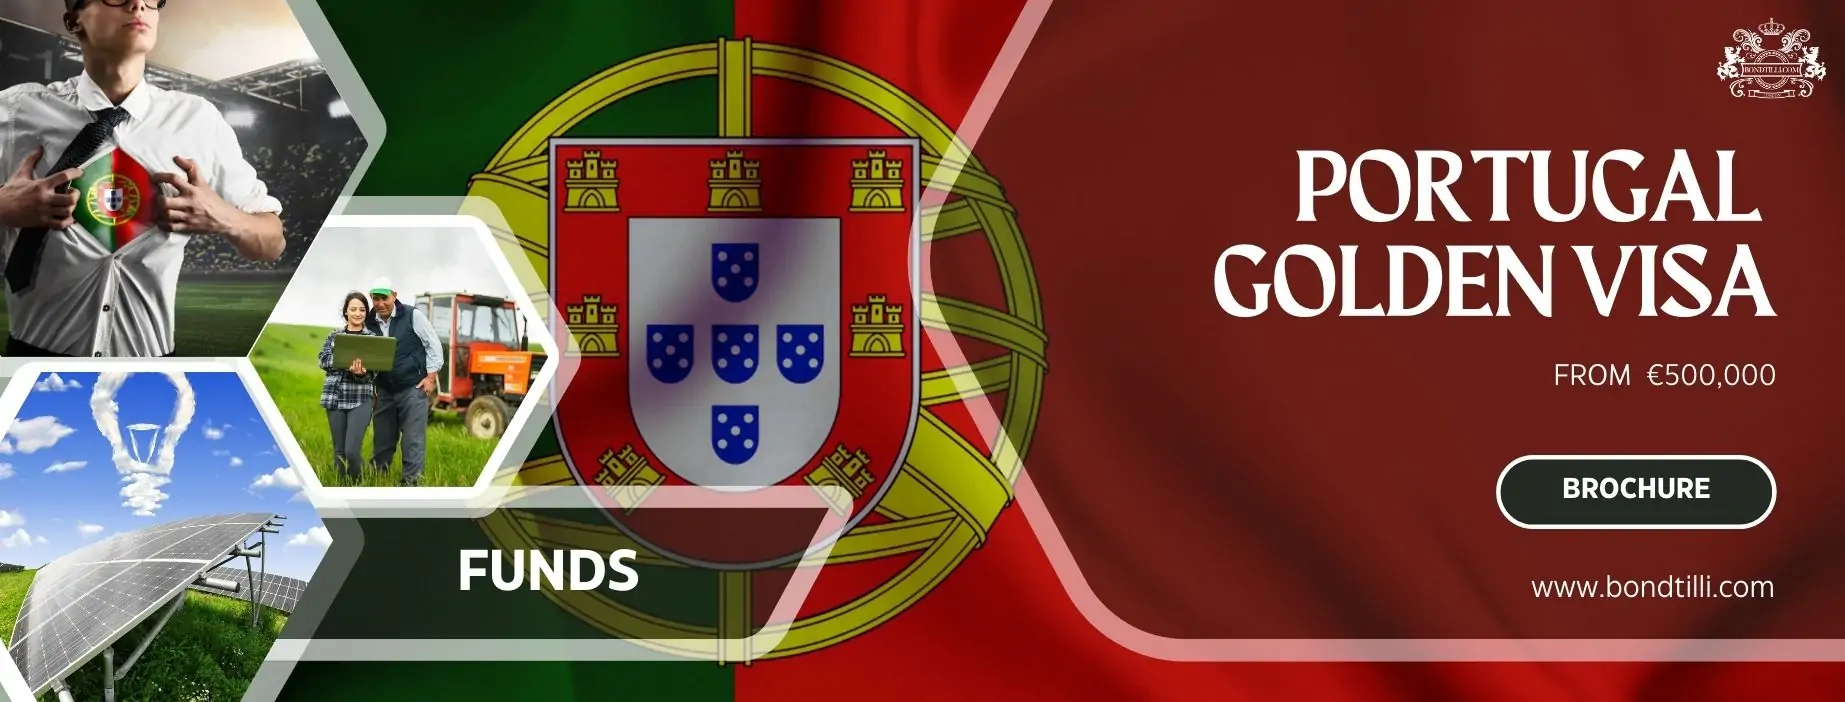 Golden Visa qualifying investments funds in portugal